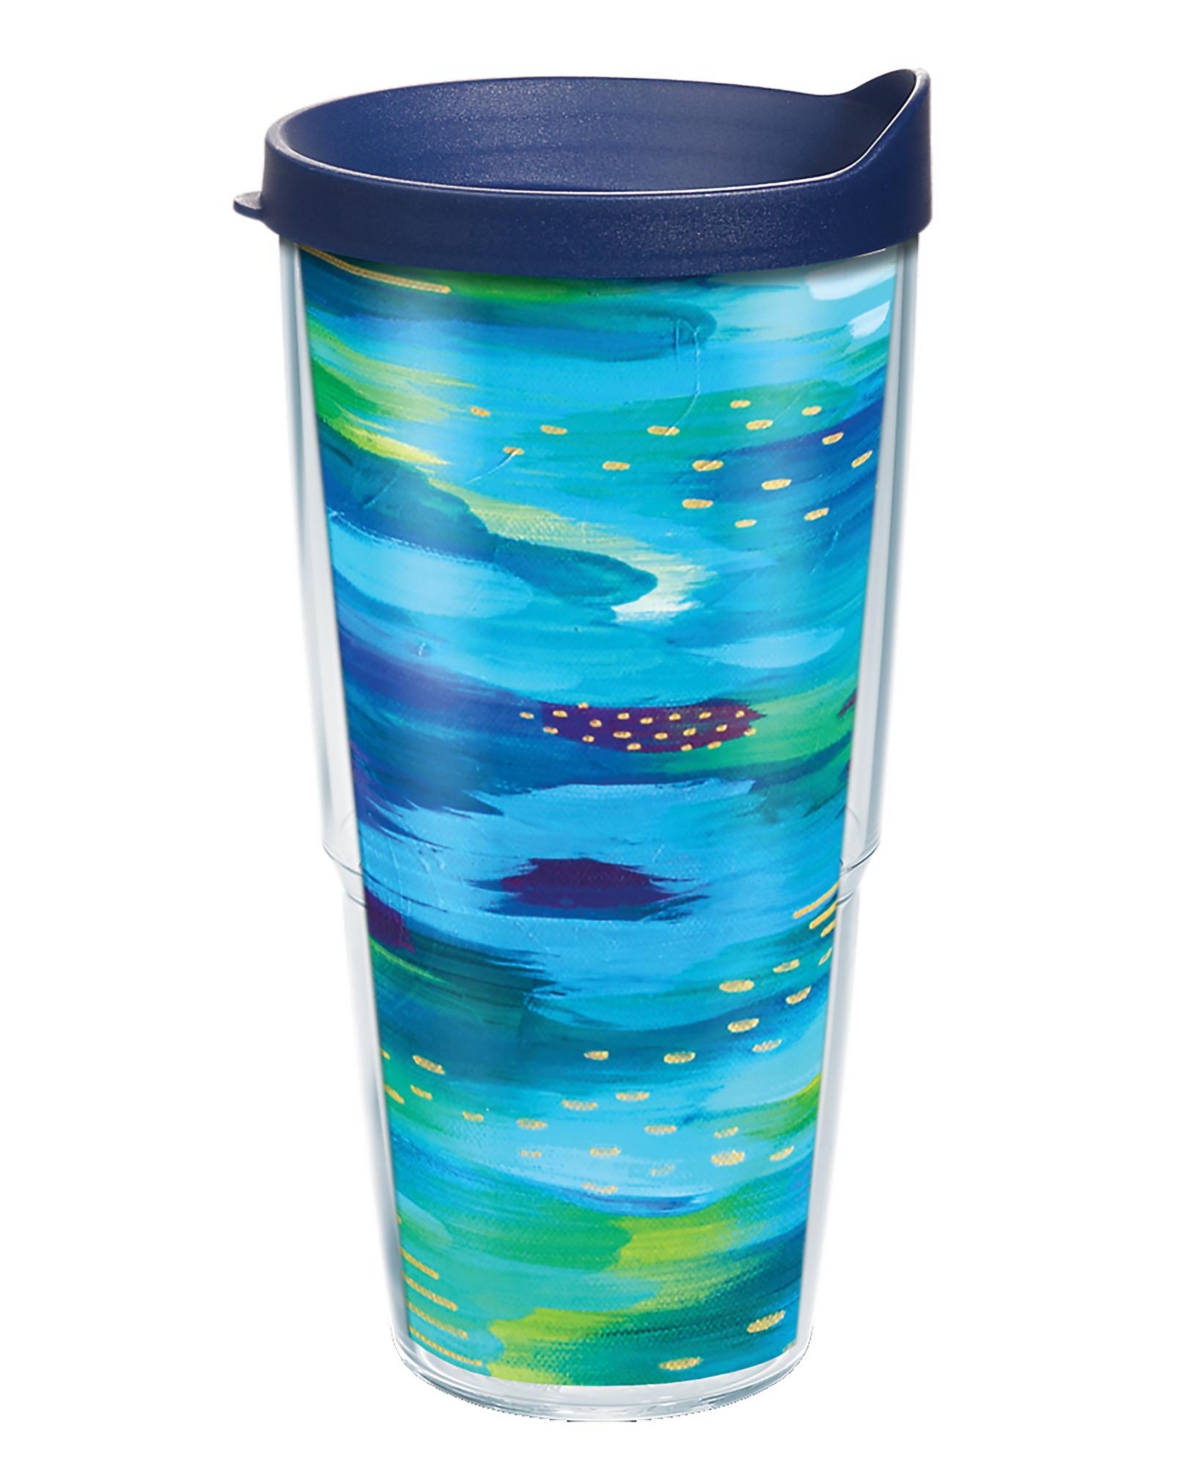 Tervis Tumbler Tervis Etta Vee Sea Of Blue Made In Usa Double Walled Insulated Tumbler Travel Cup Keeps Drinks Cold In Open Miscellaneous